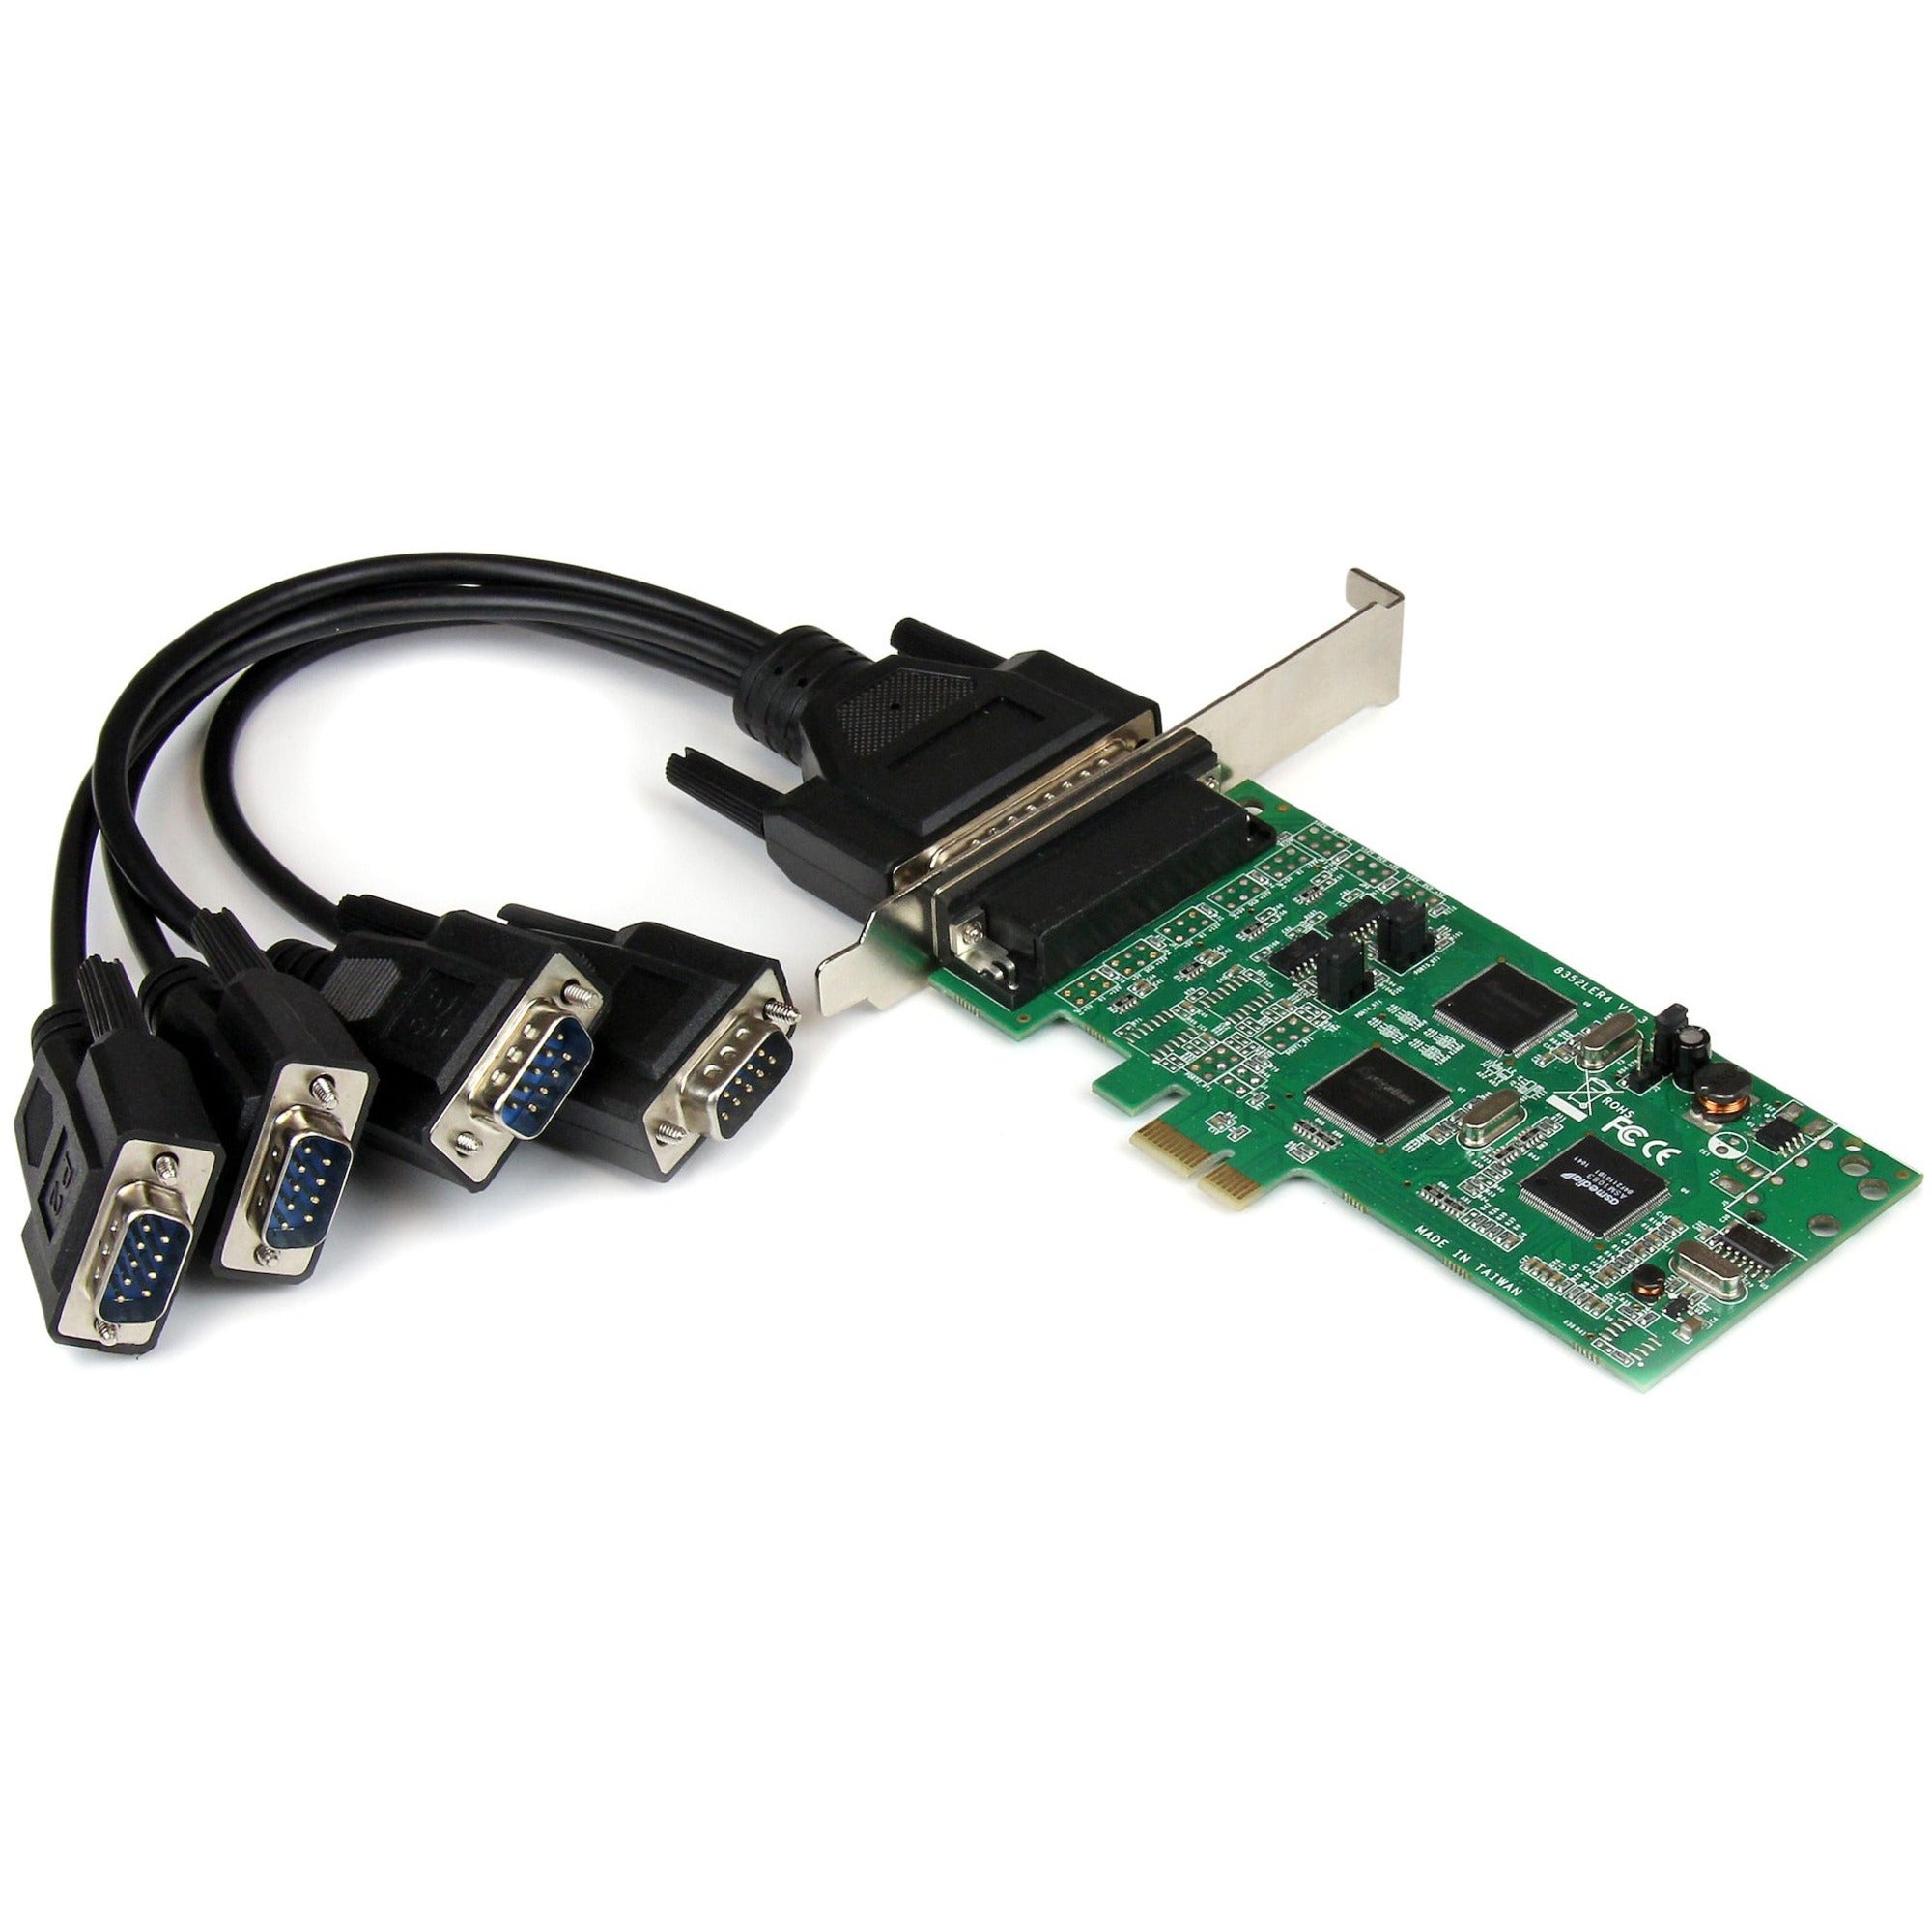 StarTech.com 4 Port PCI Express PCIe Serial Combo Card - 2 x RS232 2 x RS422 / RS485 - PEX4S232485